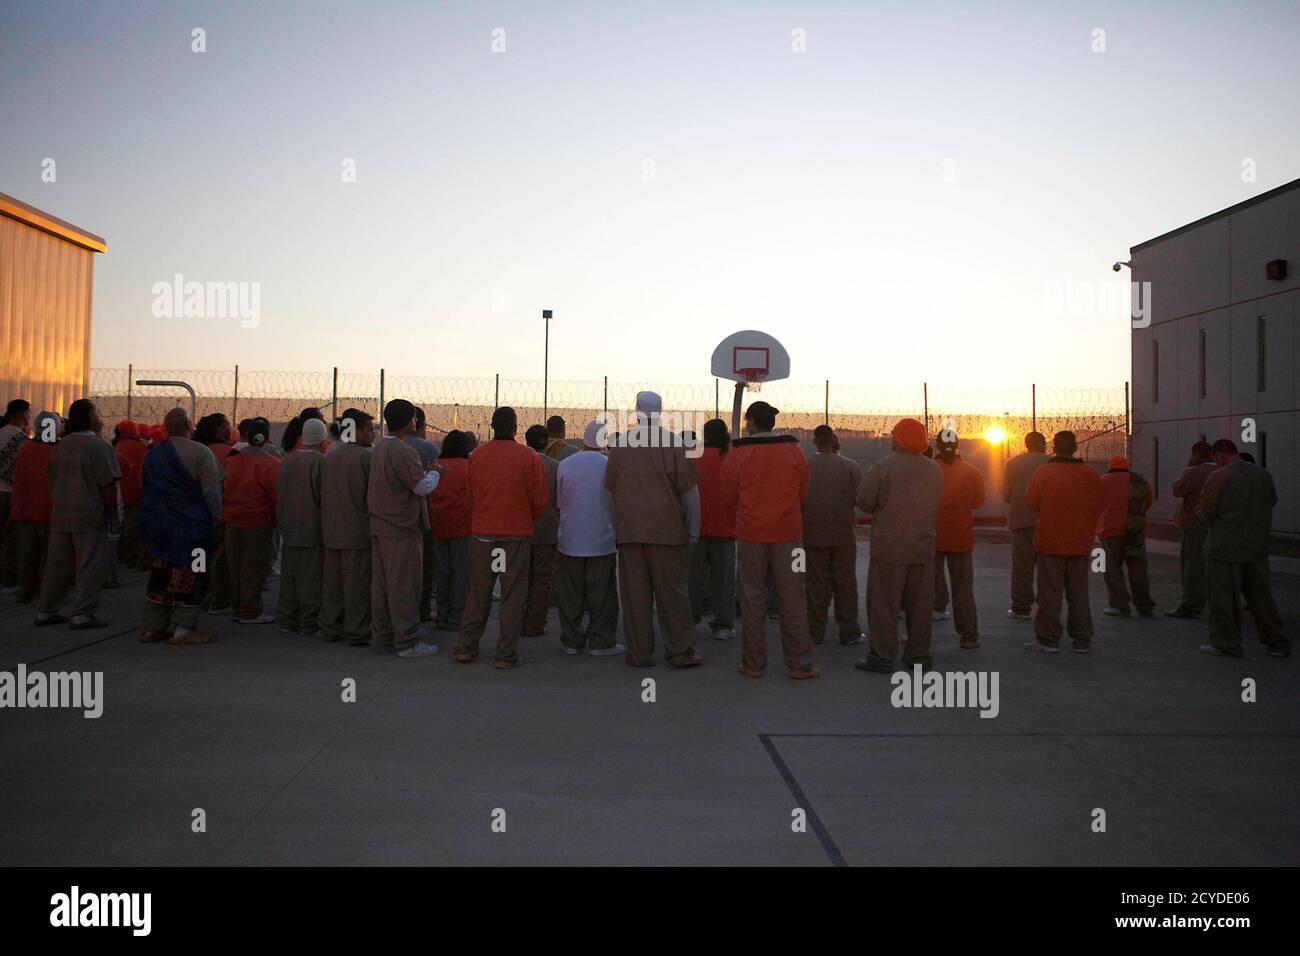 Inmates welcome the sun in celebration of the Makahiki season, the ancient Hawaiian New Year, at the Sahuaro Correctional Center in Eloy, Arizona November 9, 2011. Two spiritual leaders from Hawaii visited the prison to teach and enlighten Hawaiian inmates of their culture. The facility in Arizona currently houses prisoners from Hawaii. REUTERS/Samantha Sais (UNITED STATES - Tags: CRIME LAW SOCIETY) Stock Photo